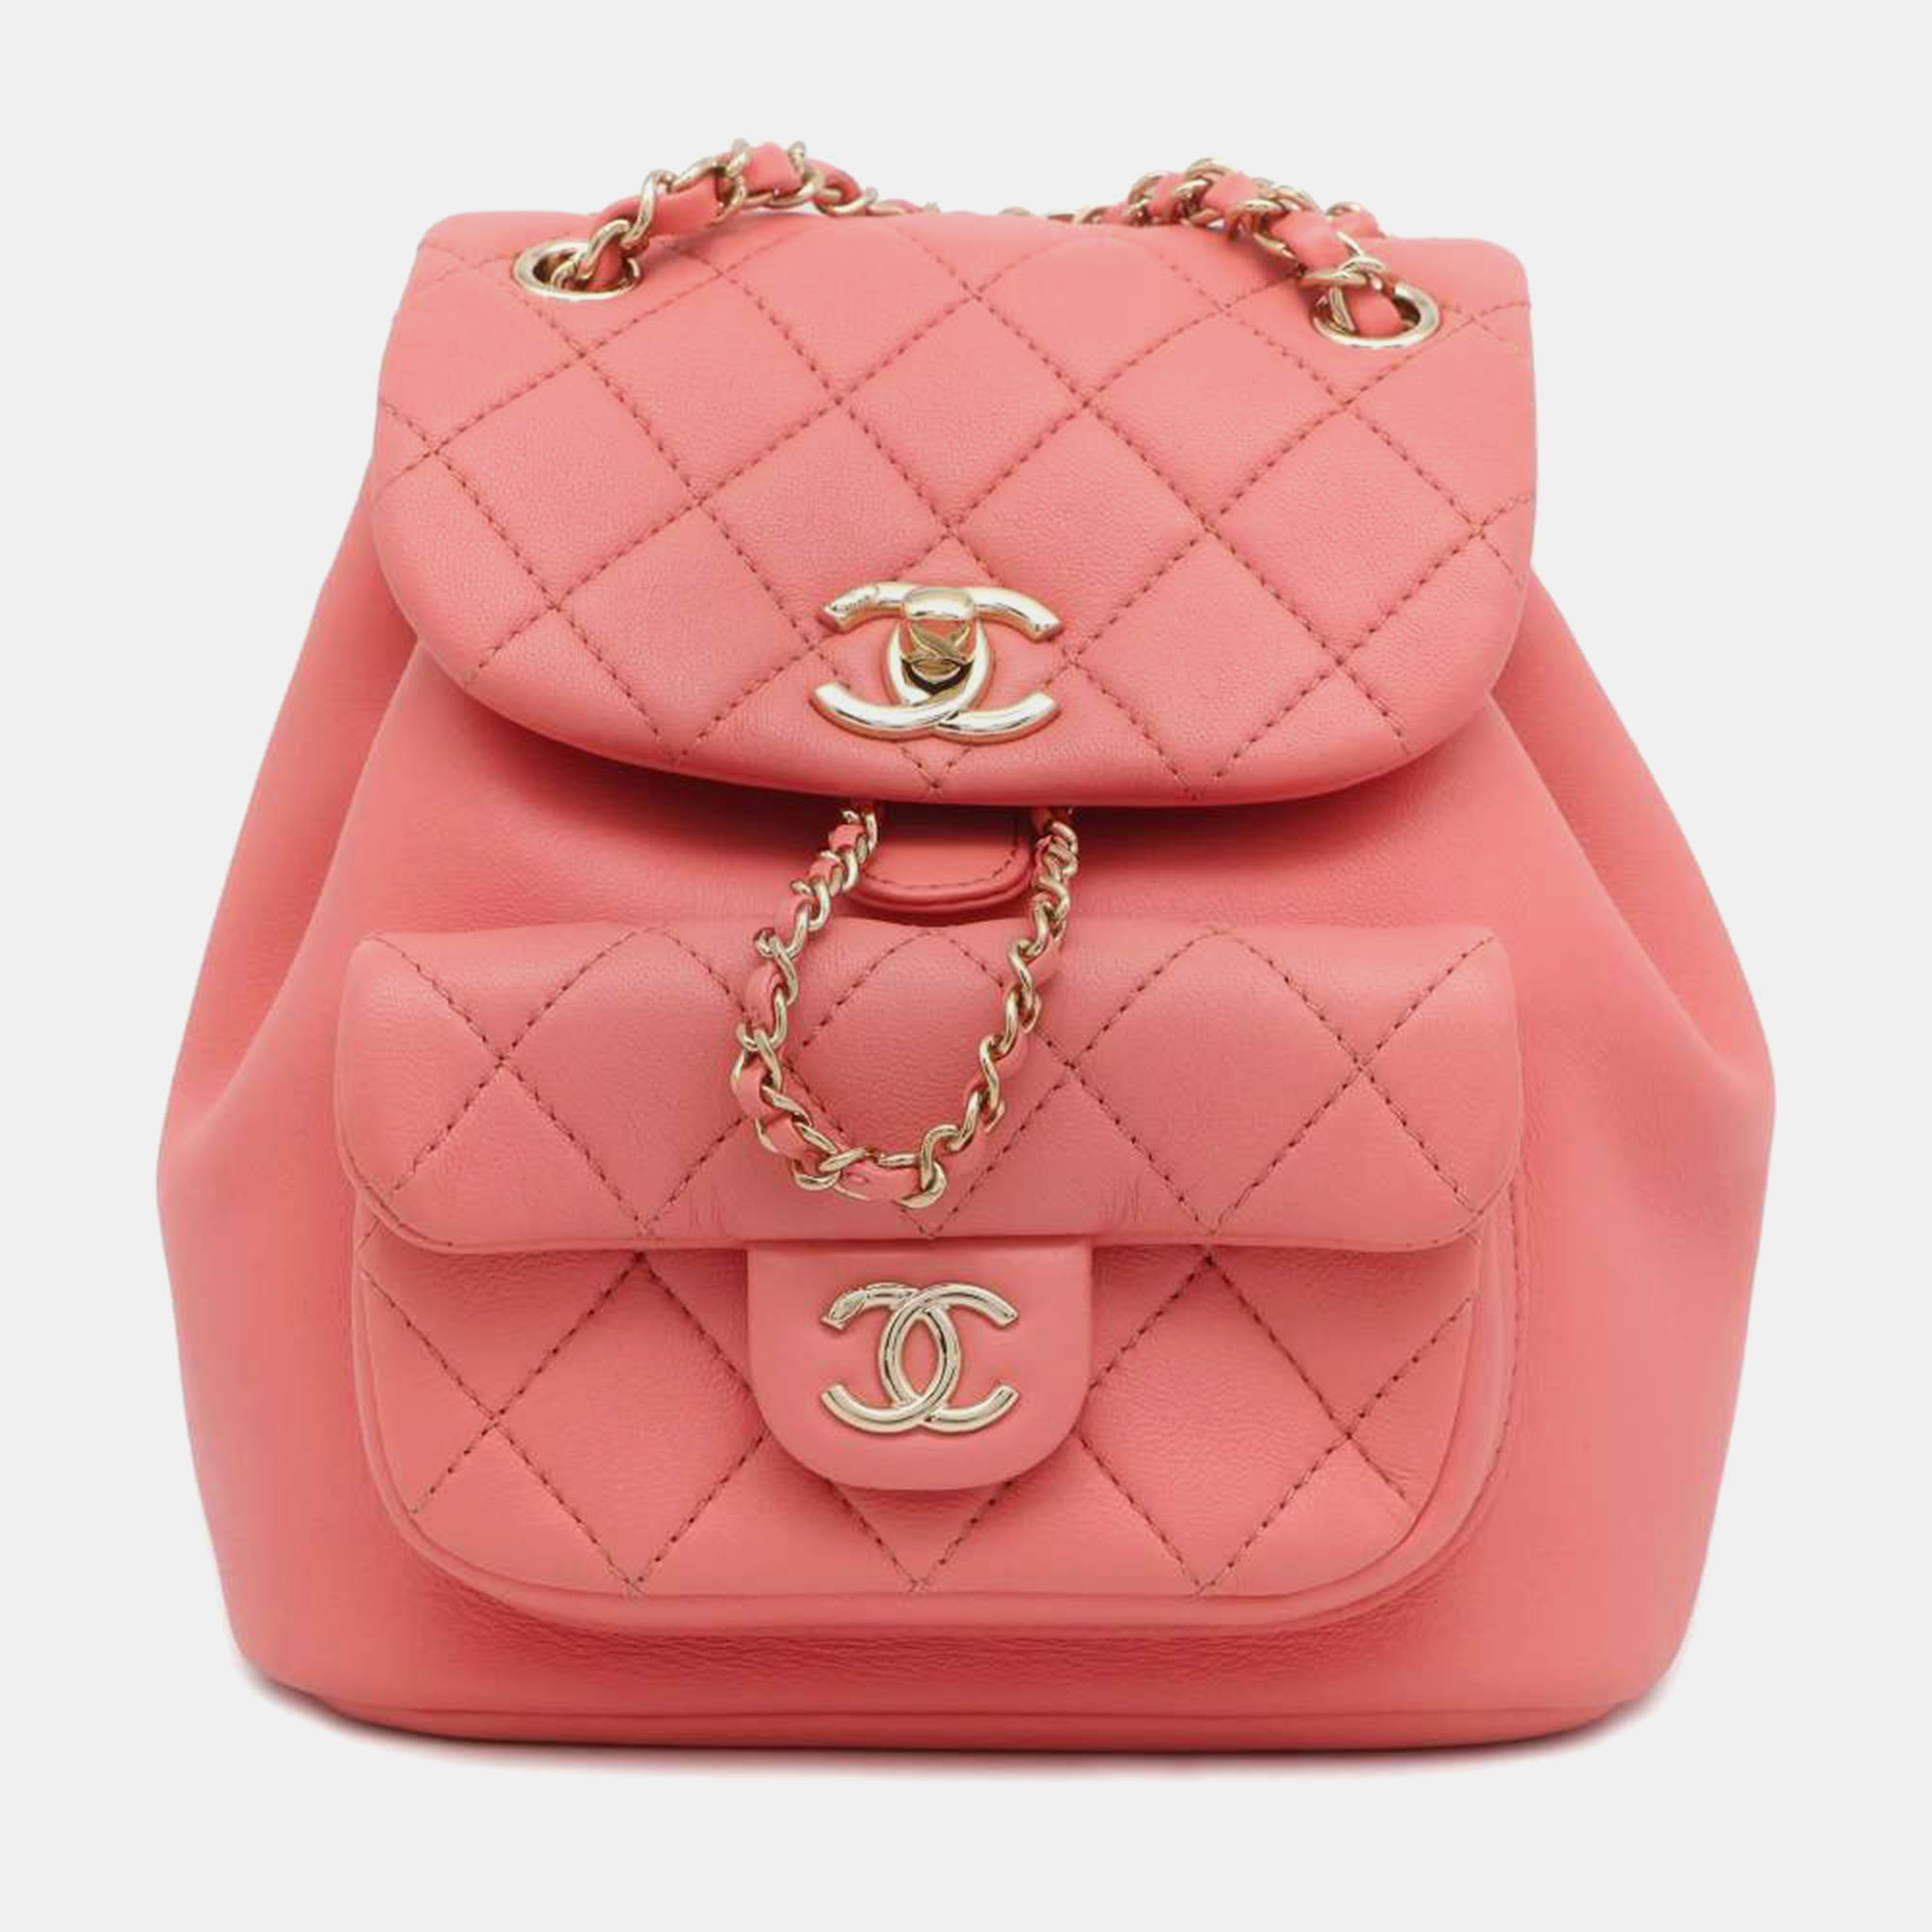 Chanel pink leather cc backpack